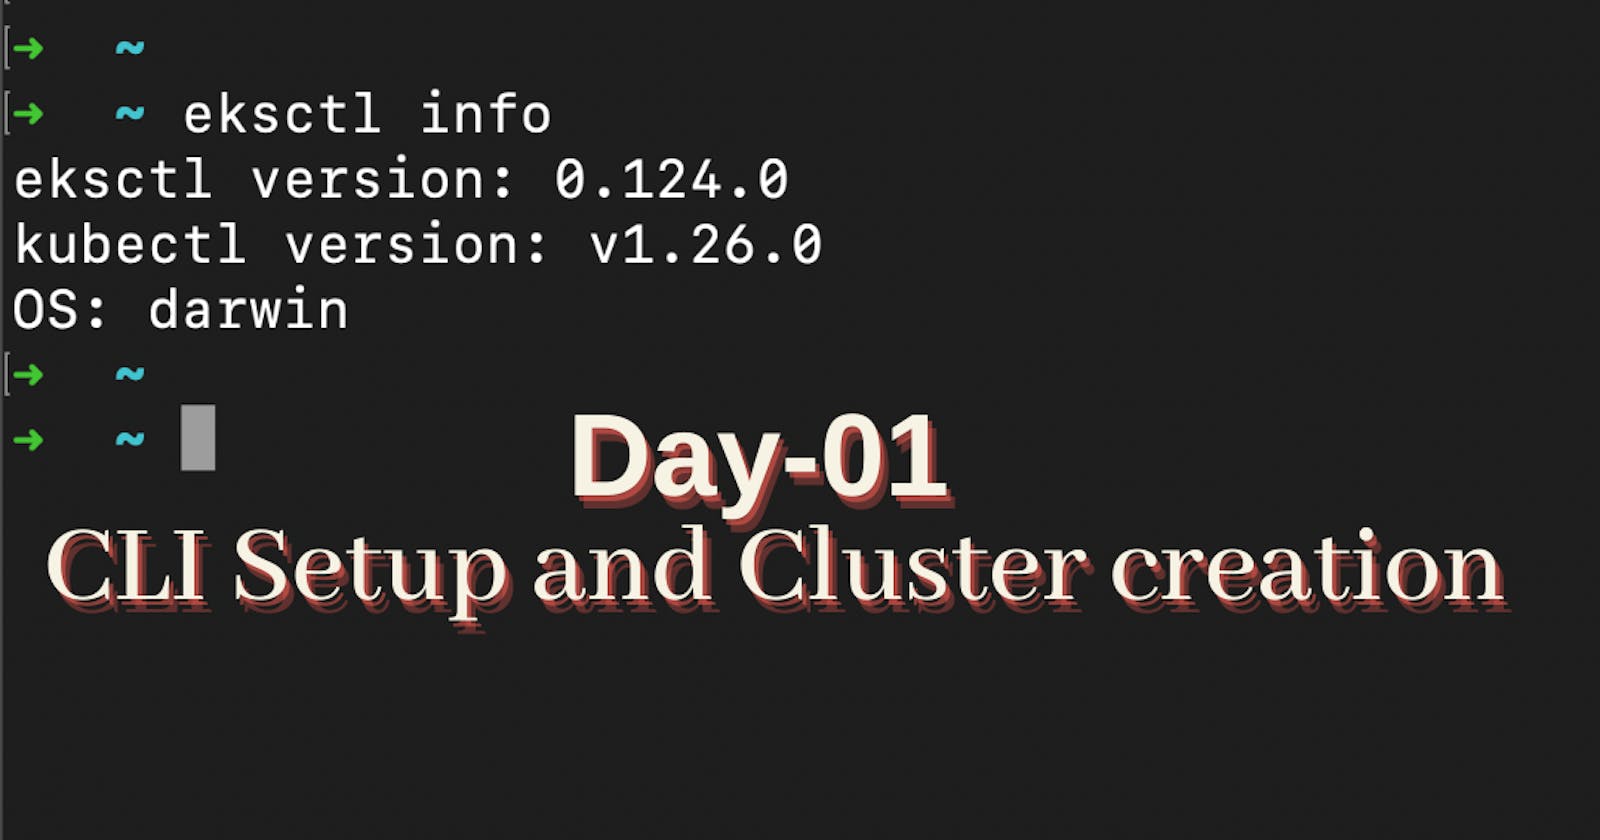 Day-01 CLI Setup and Cluster creation.